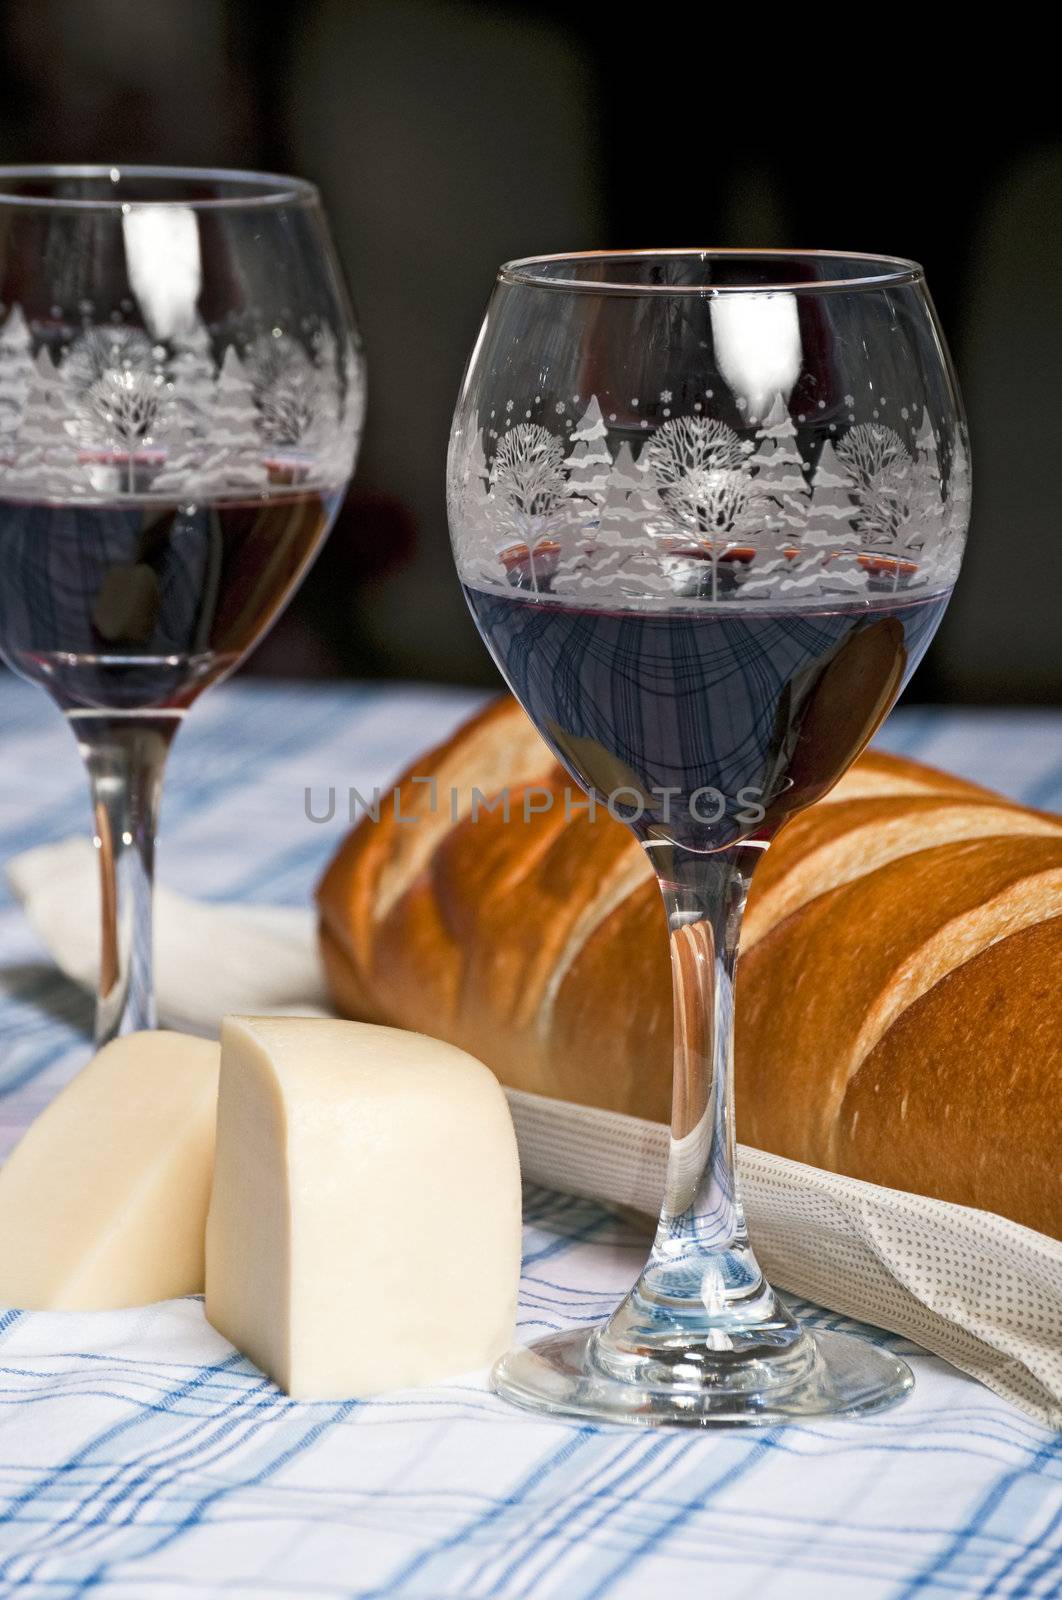 French bread wine glasses and cheese wedge for Christmas by rcarner